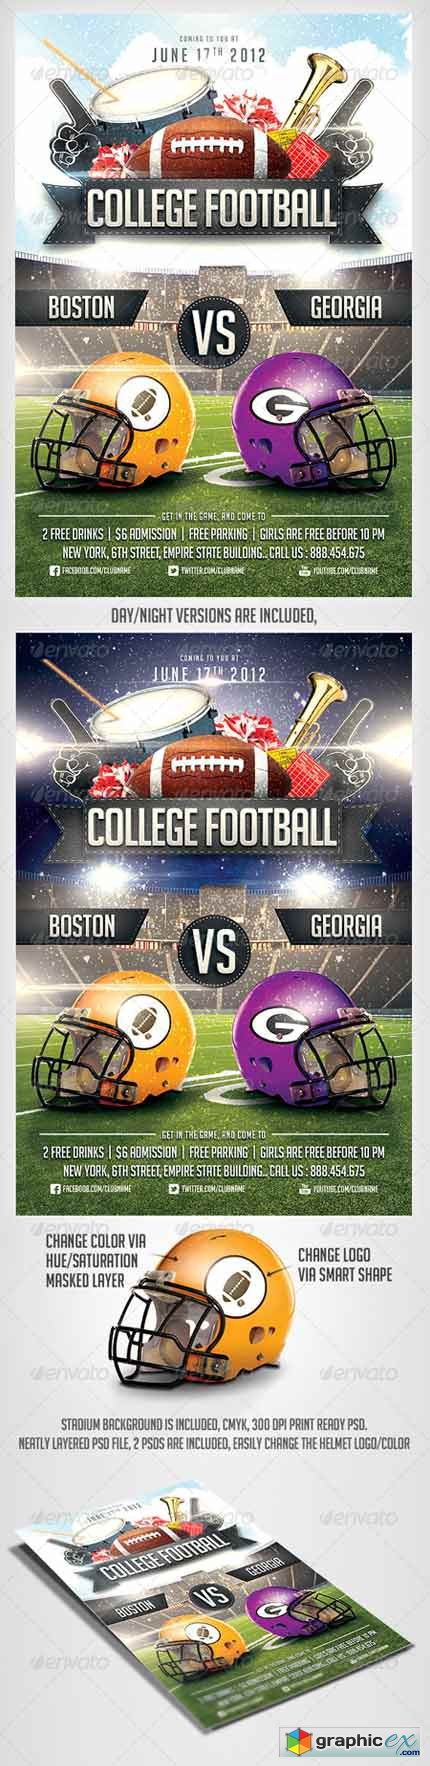 College Football Flyer Template 2921123